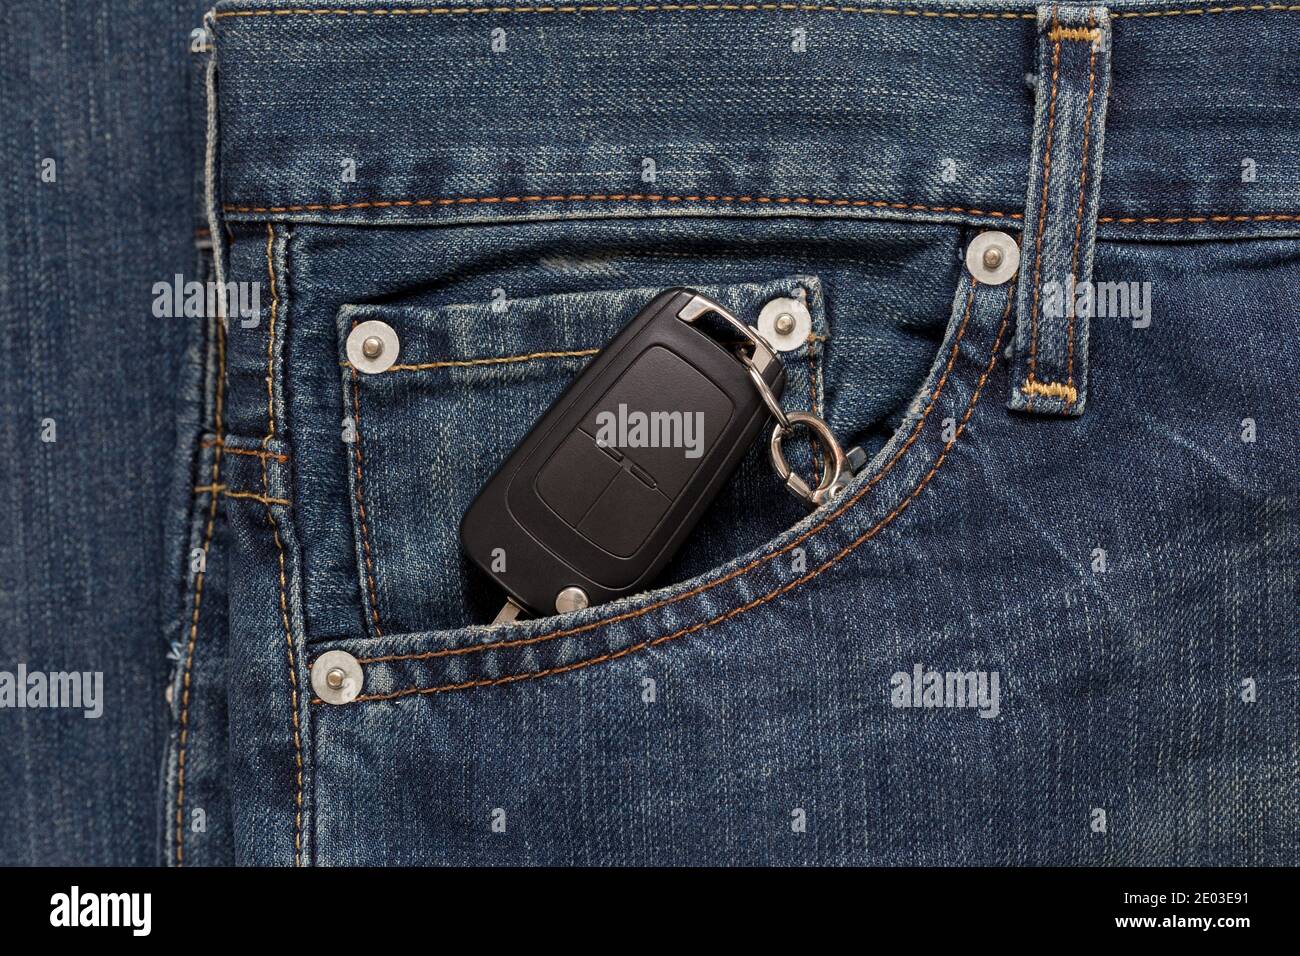 Ignition key is lying in side pocket of blue jeans. Modern lifestyle. Stock Photo